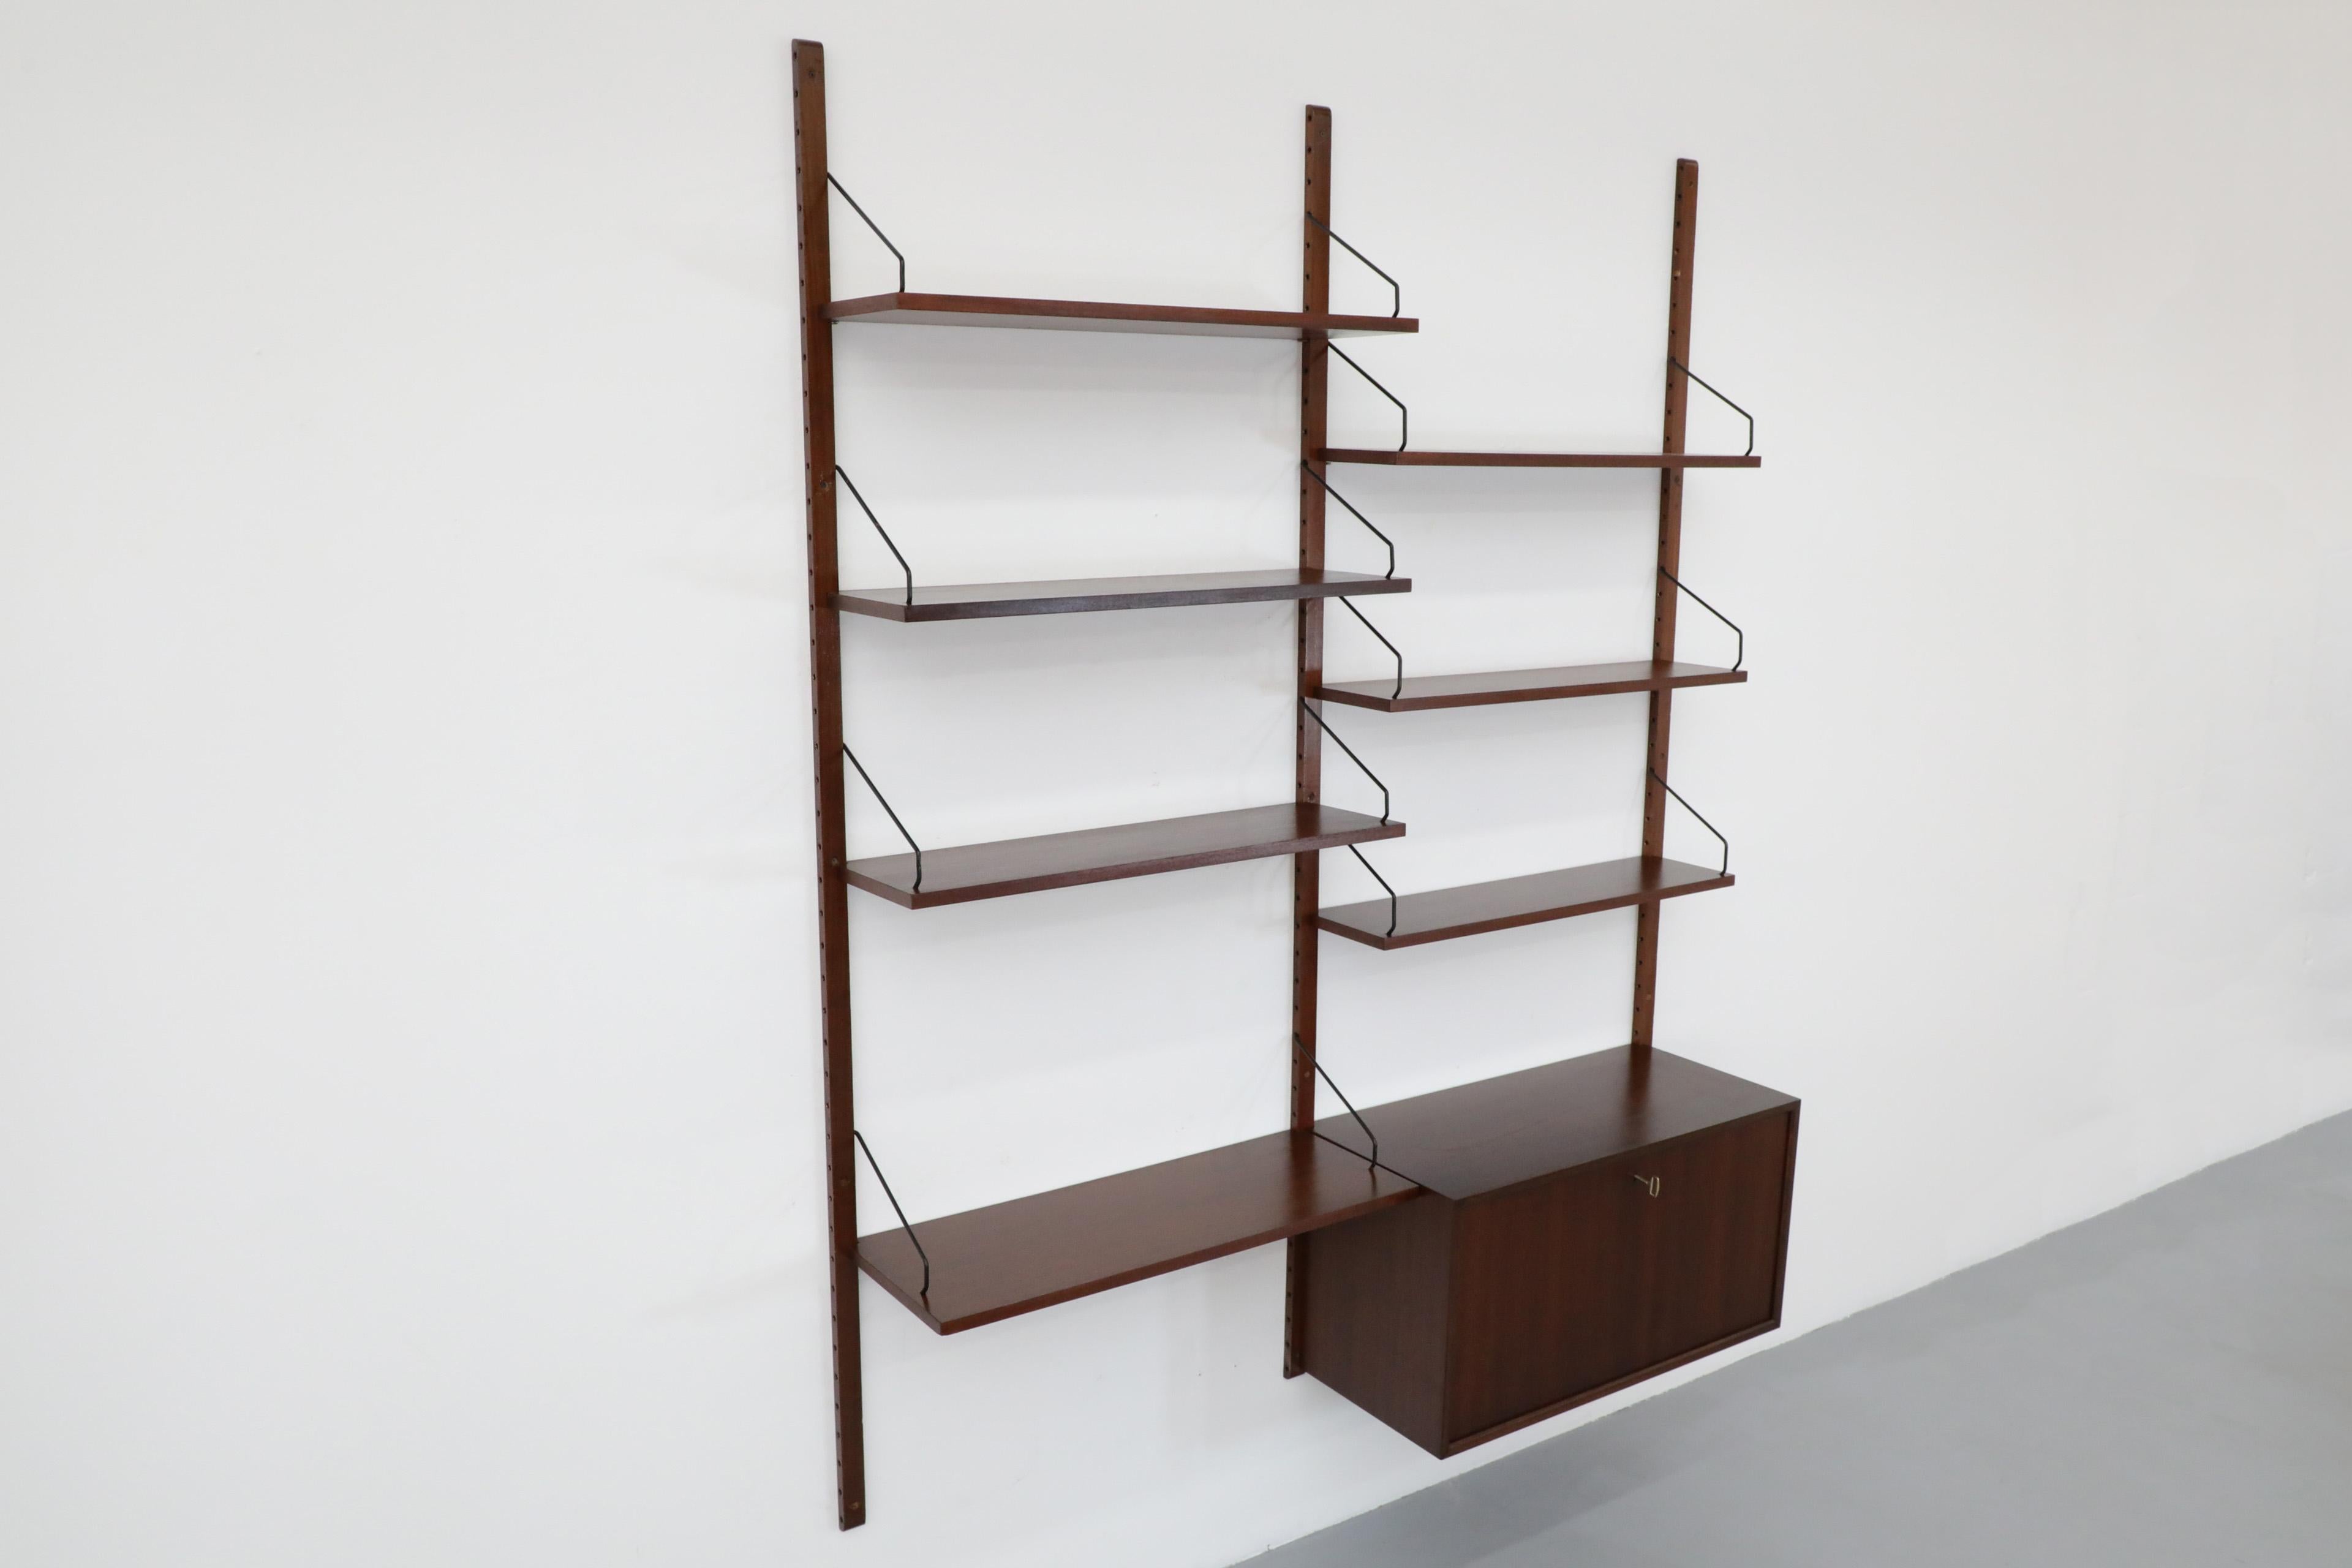 Royal System wall mounted two section Rosewood adjustable shelving unit with locking cabinet and desk shelf by Poul Cadovius. The shelves can be arranged in a number of ways with six small shelves (8